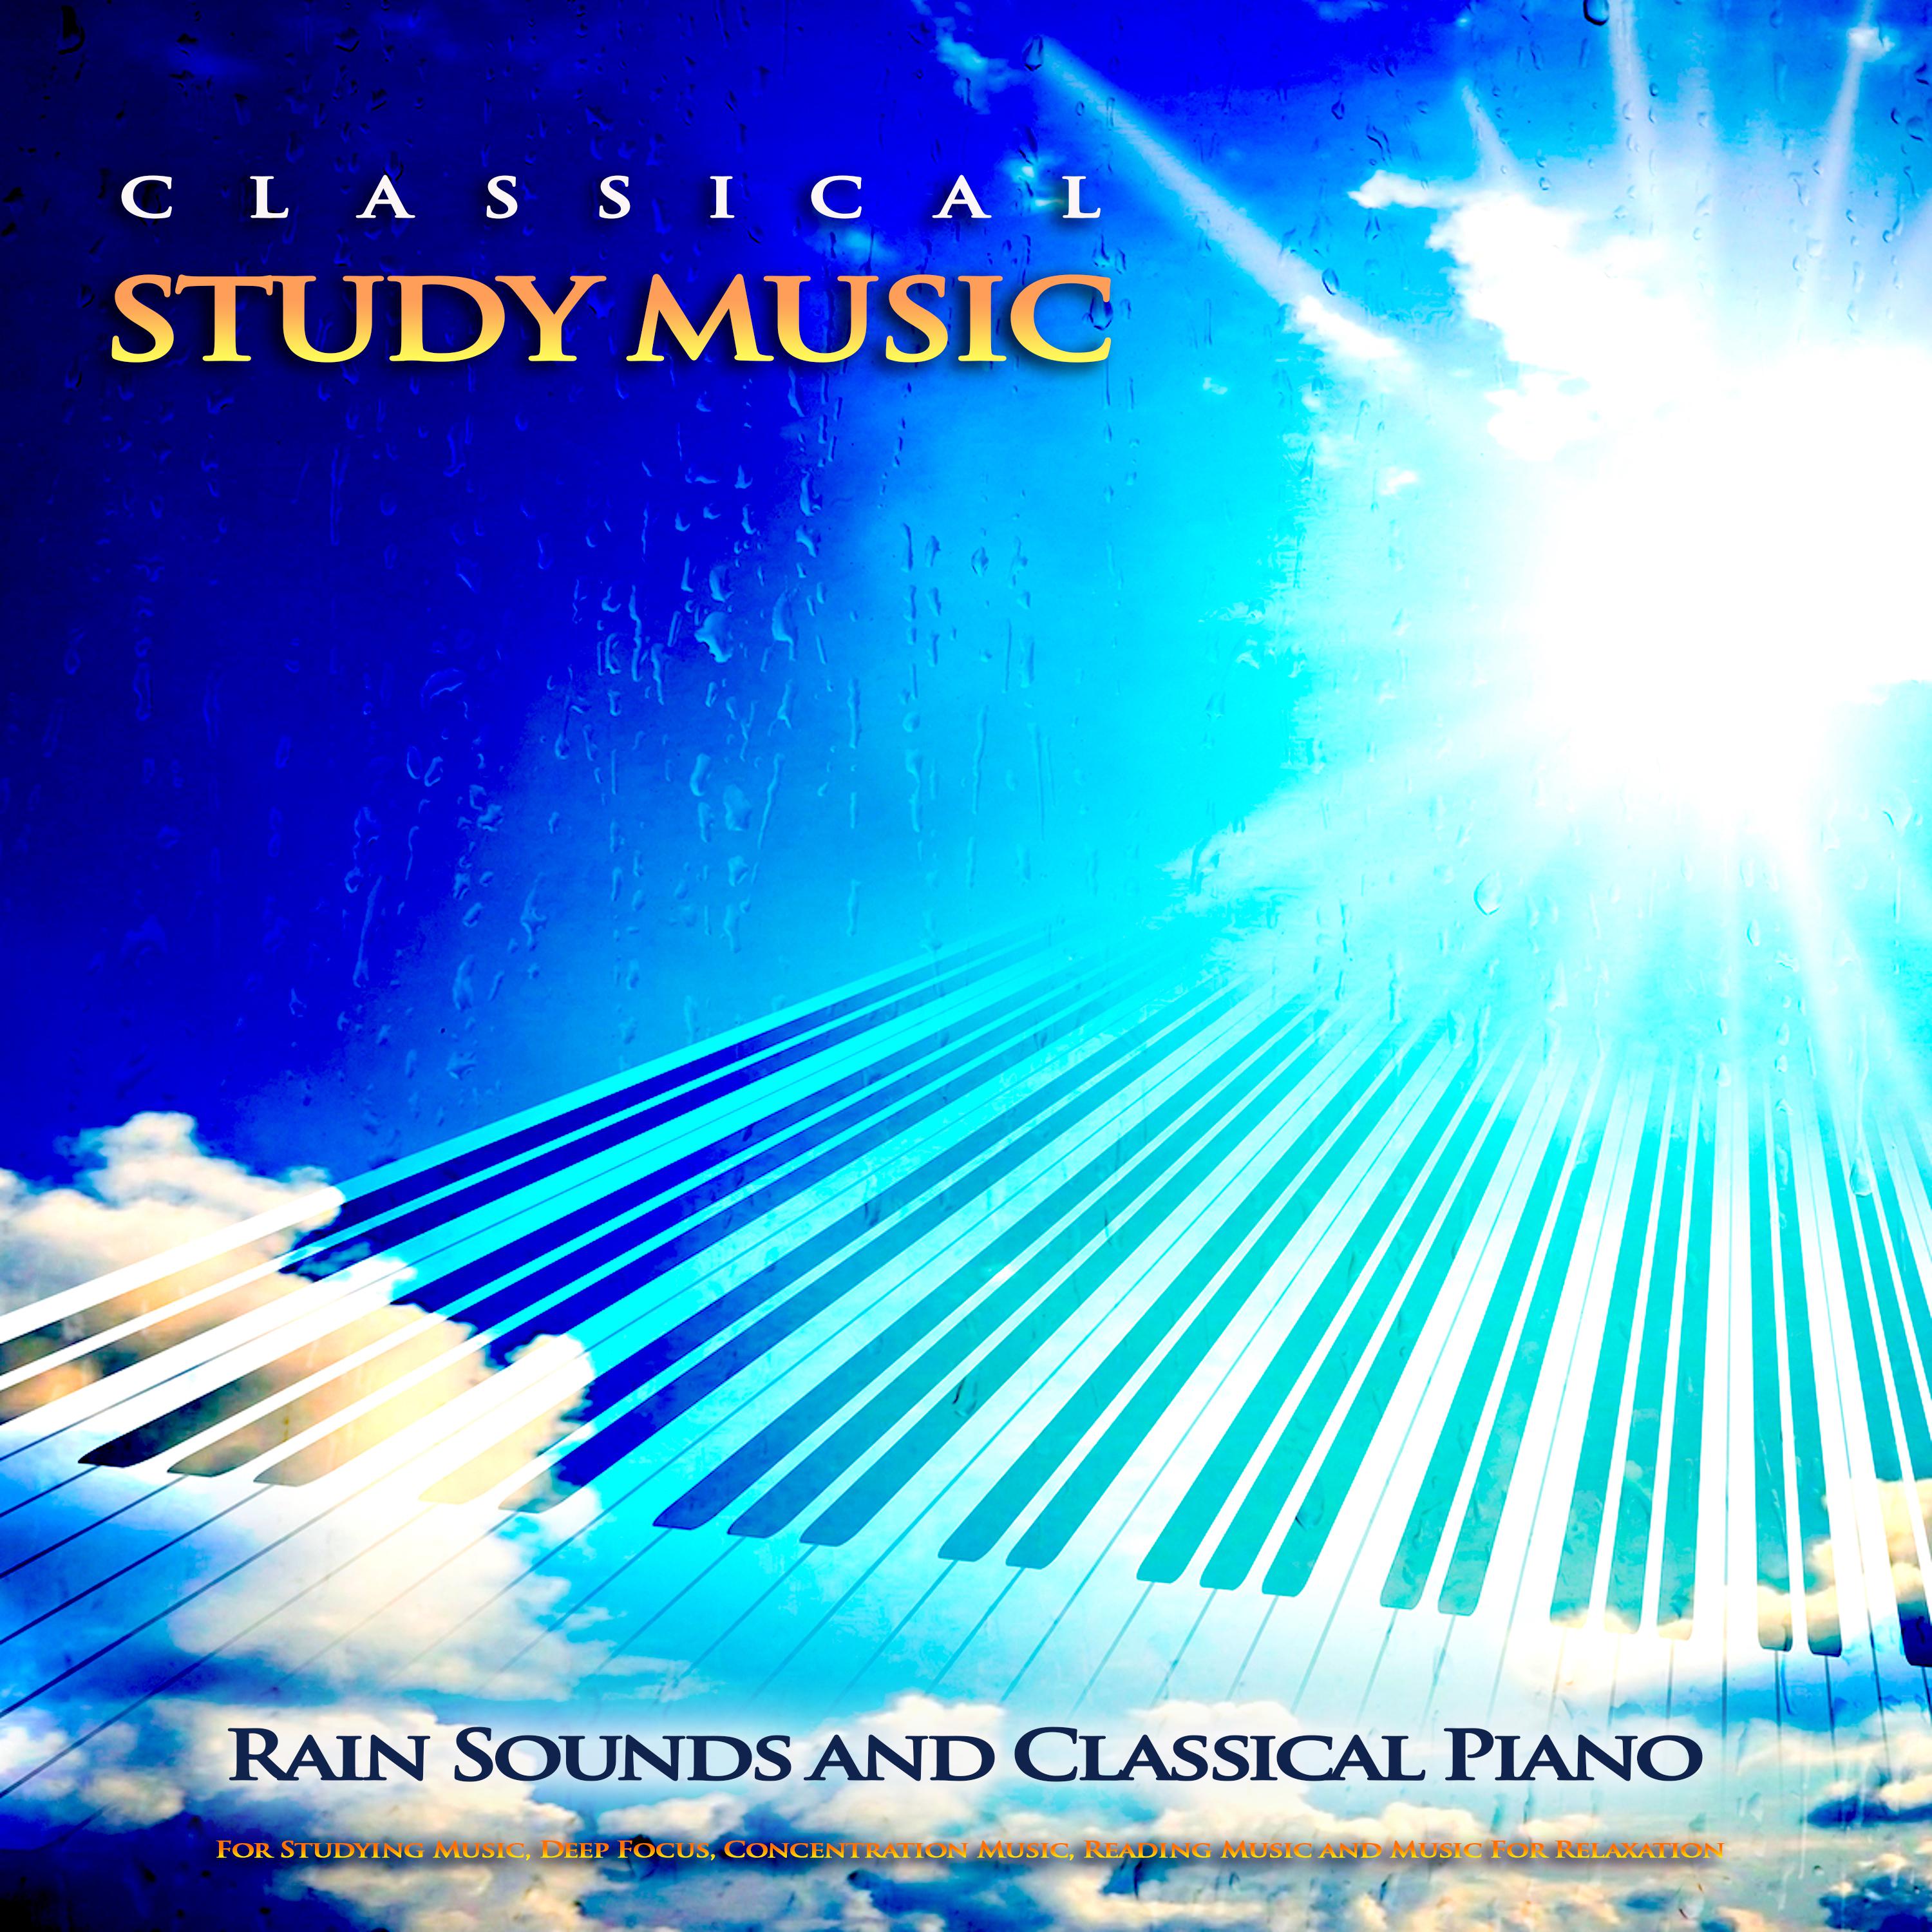 Pavane Pour Une Infante Défunte - Ravel - Classical Piano Music and Rain Sounds - Classical Music For Studying